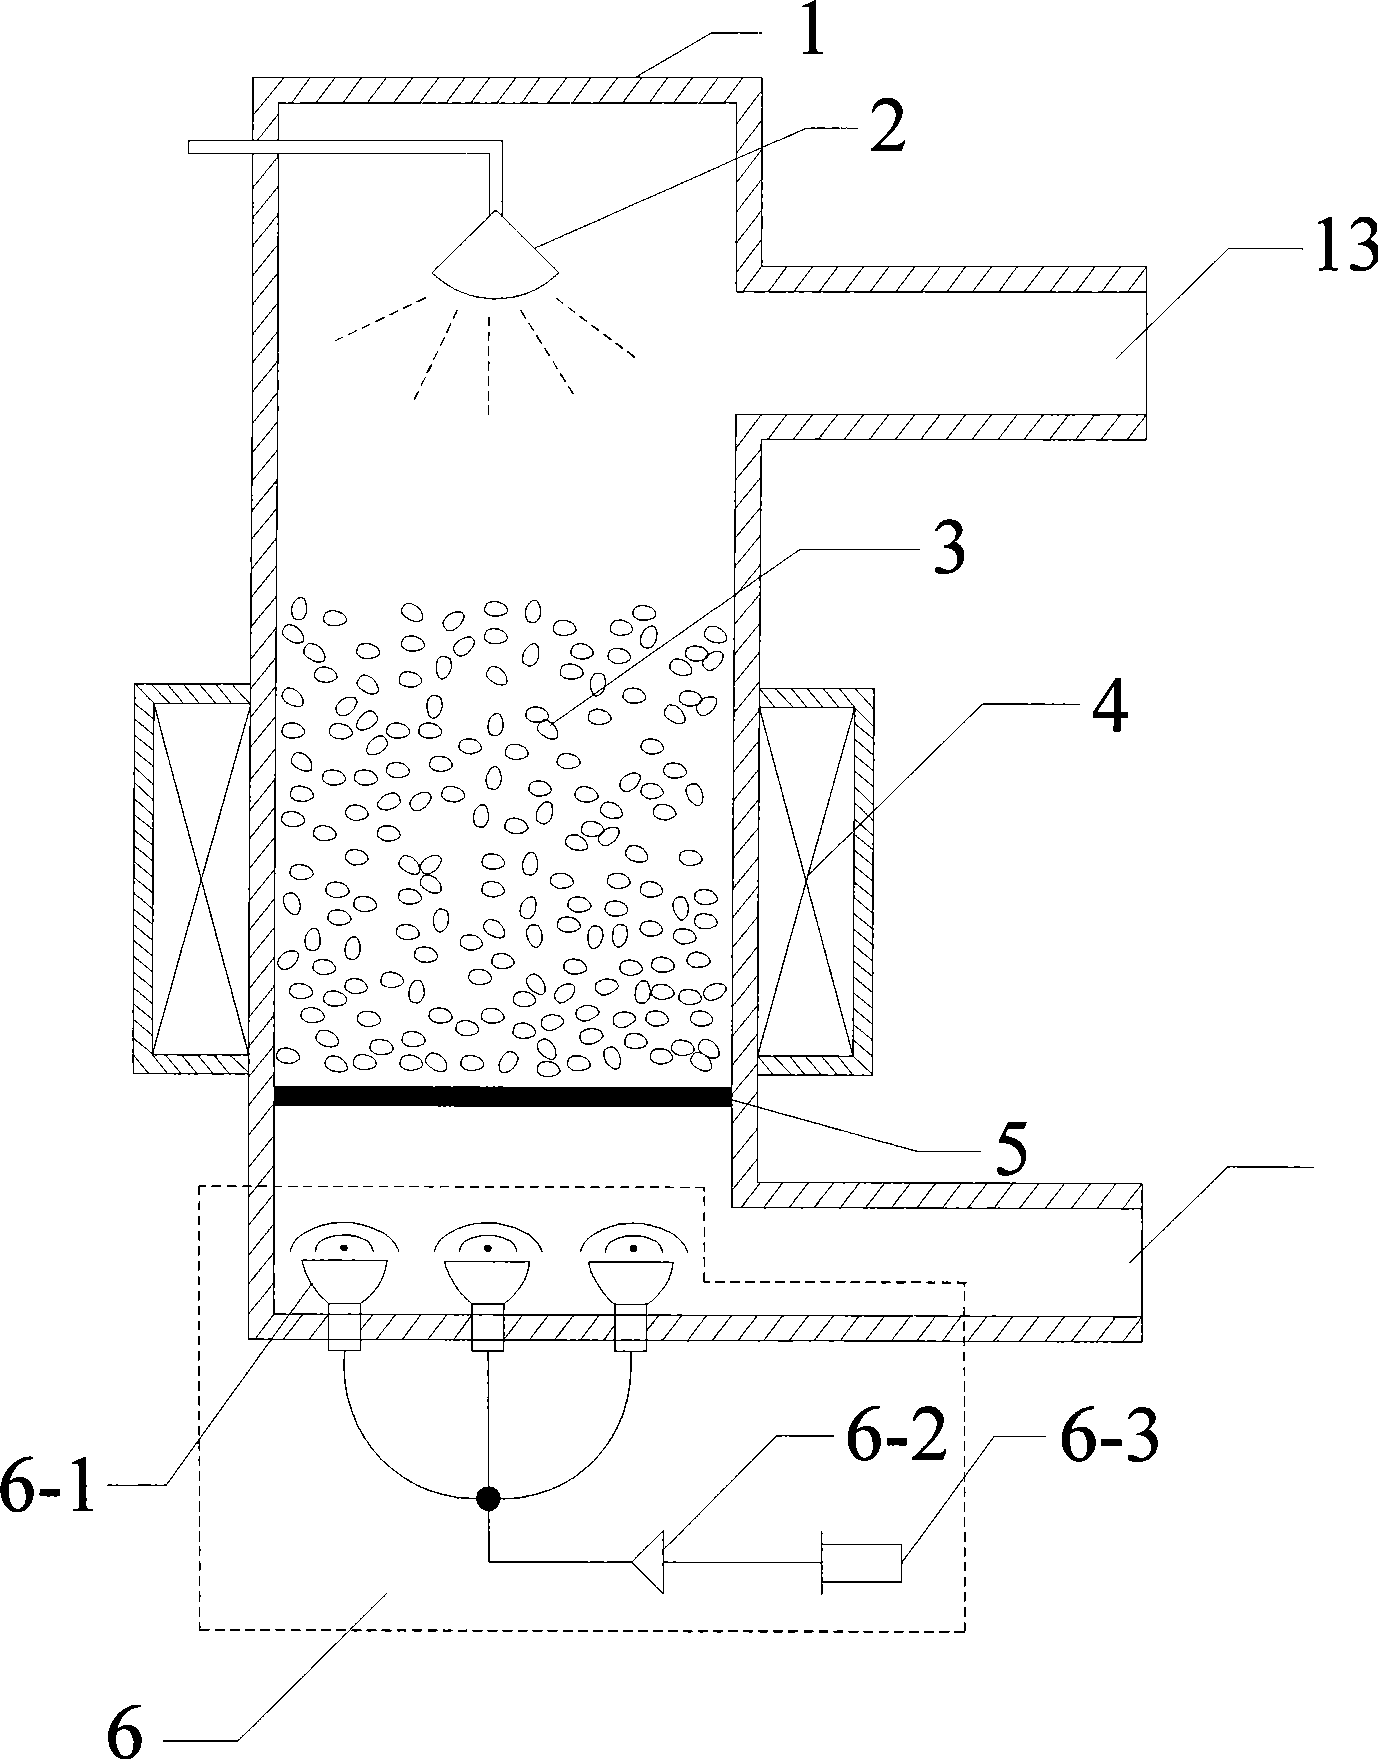 Dedusting and desulfurizing fluid bed reactor with combined action of sound and magnetism